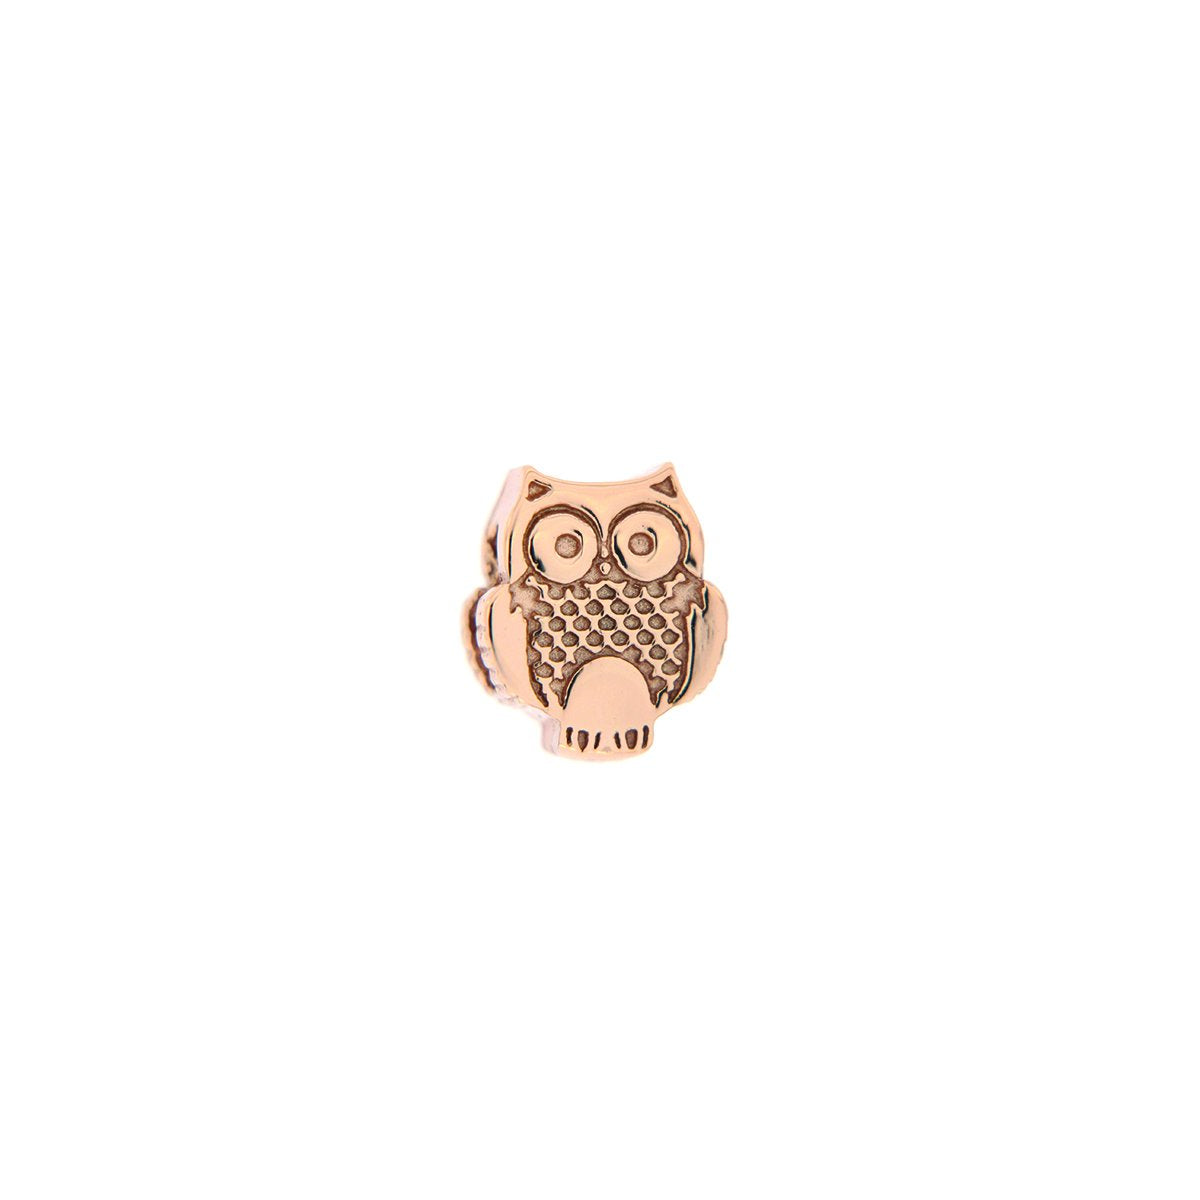 Moments - Caousel Owl Moment - 1 | Rue des Mille